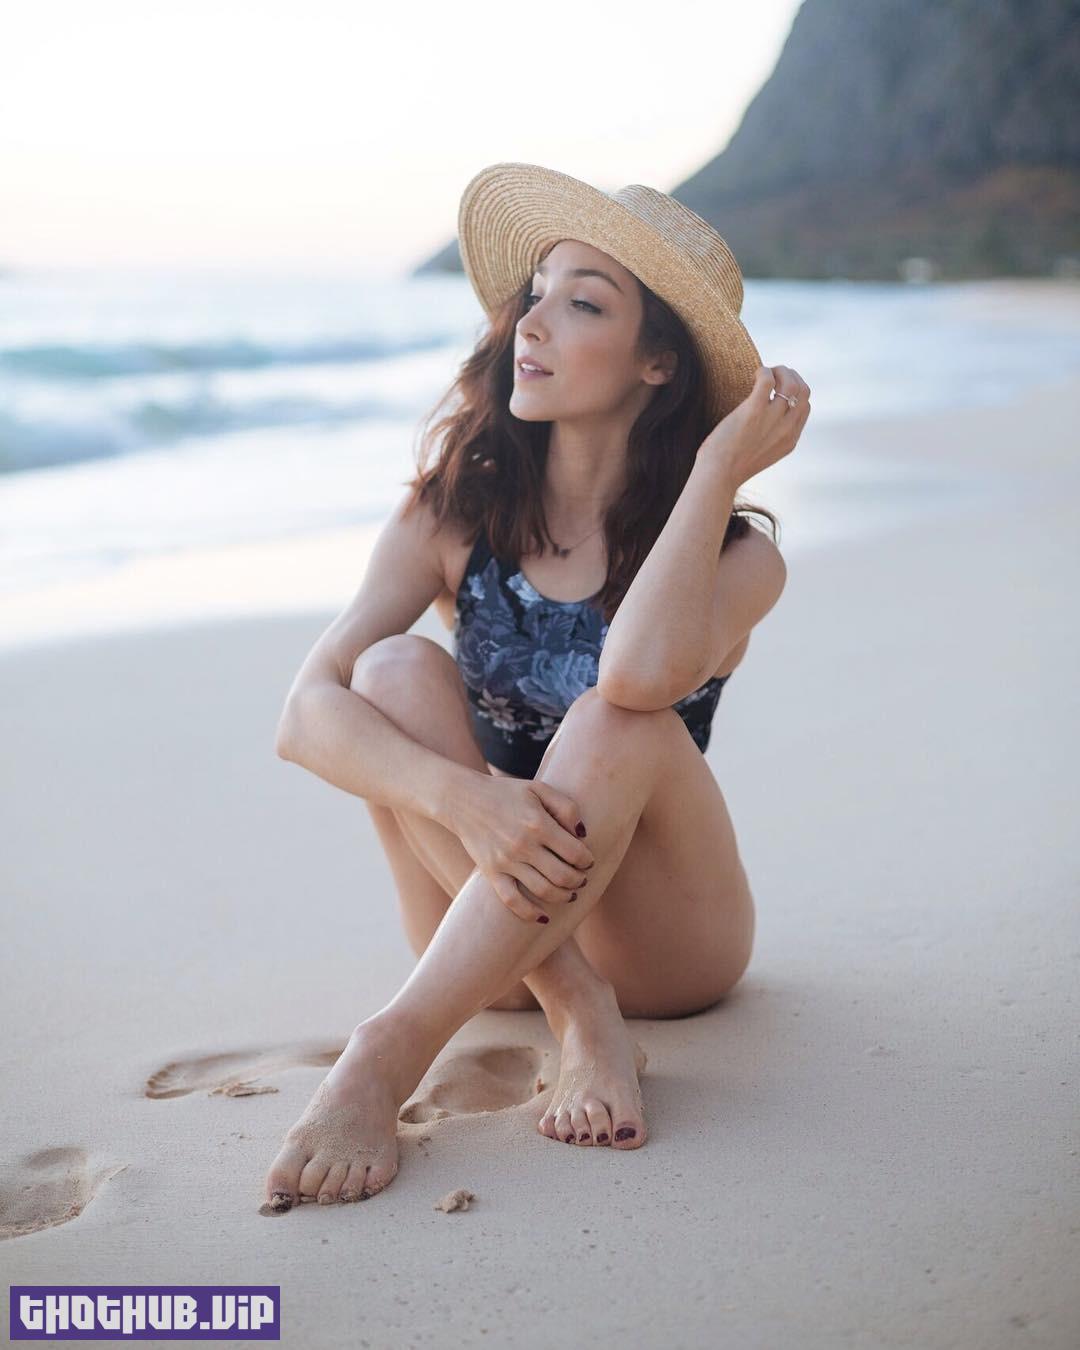 1698936104 975 Meryl Davis Fappening Collection 2019 35 Photos And Video